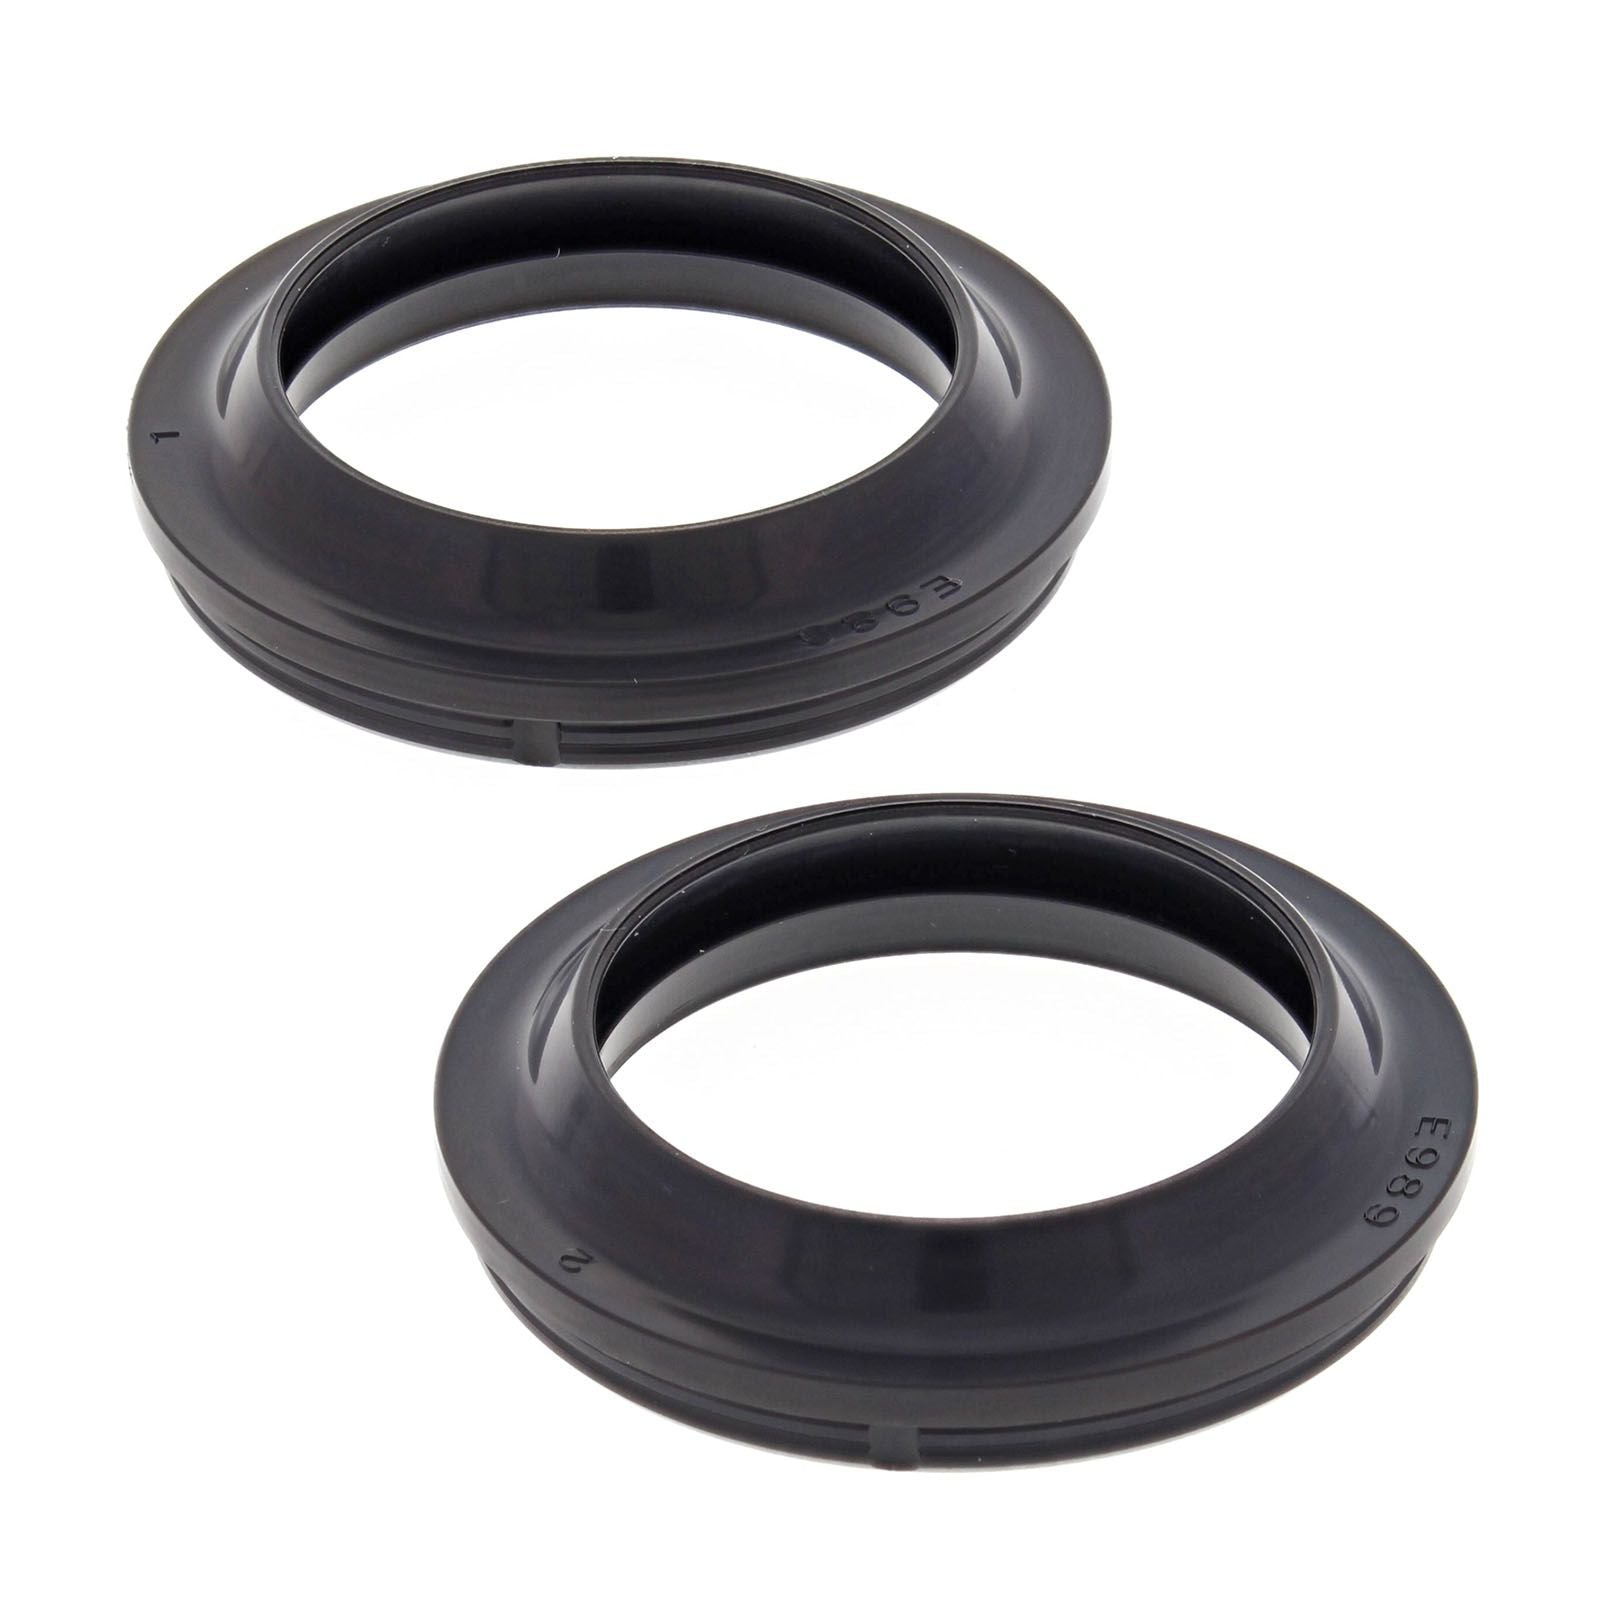 New ALL BALLS Racing Fork Dust Seal Kit #AB57149